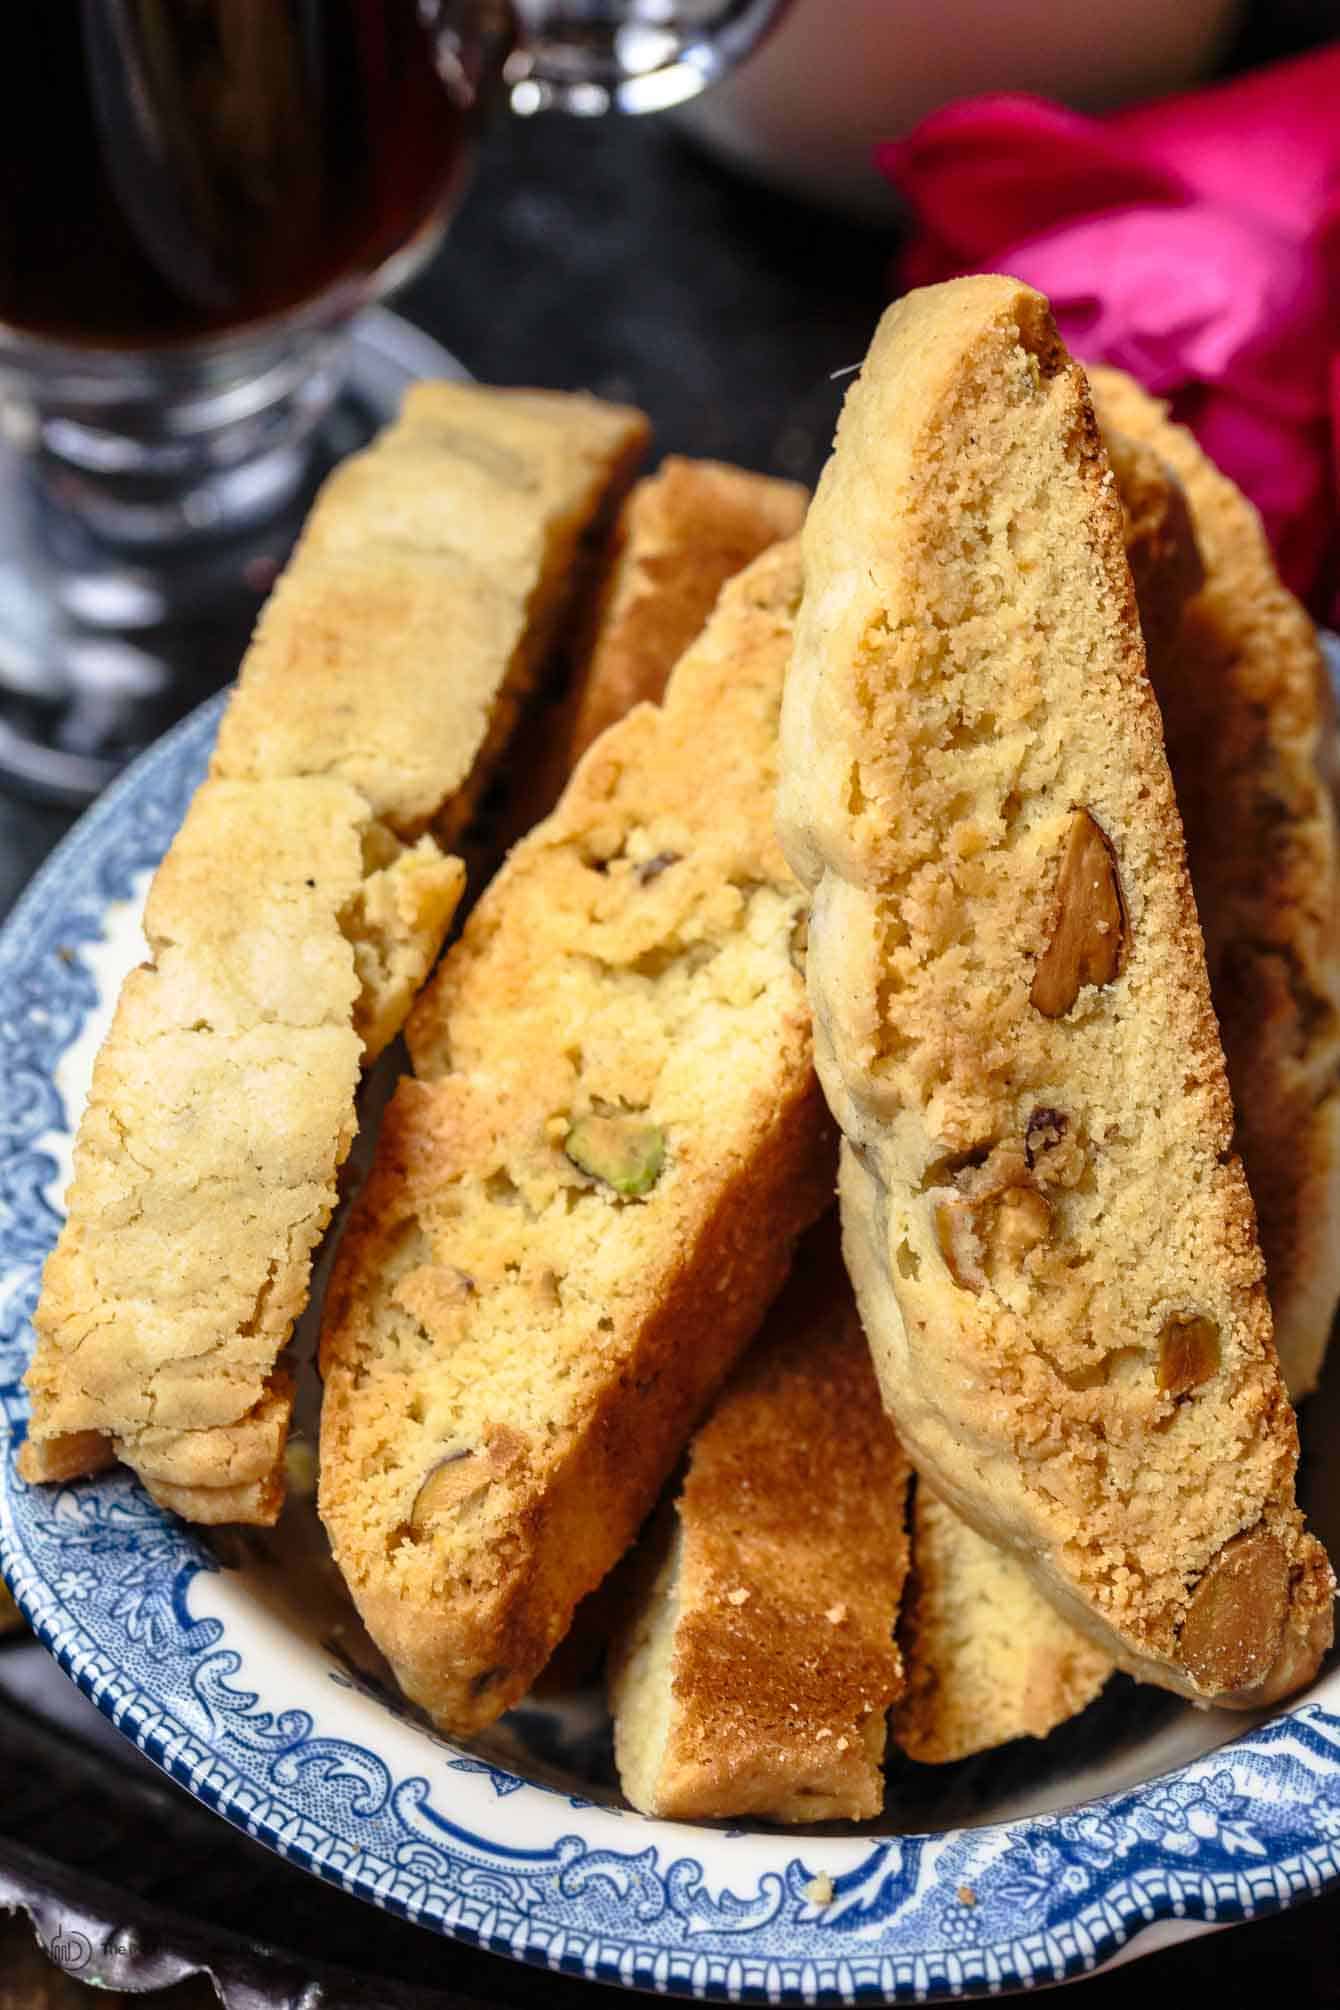 Biscotti with pistachios